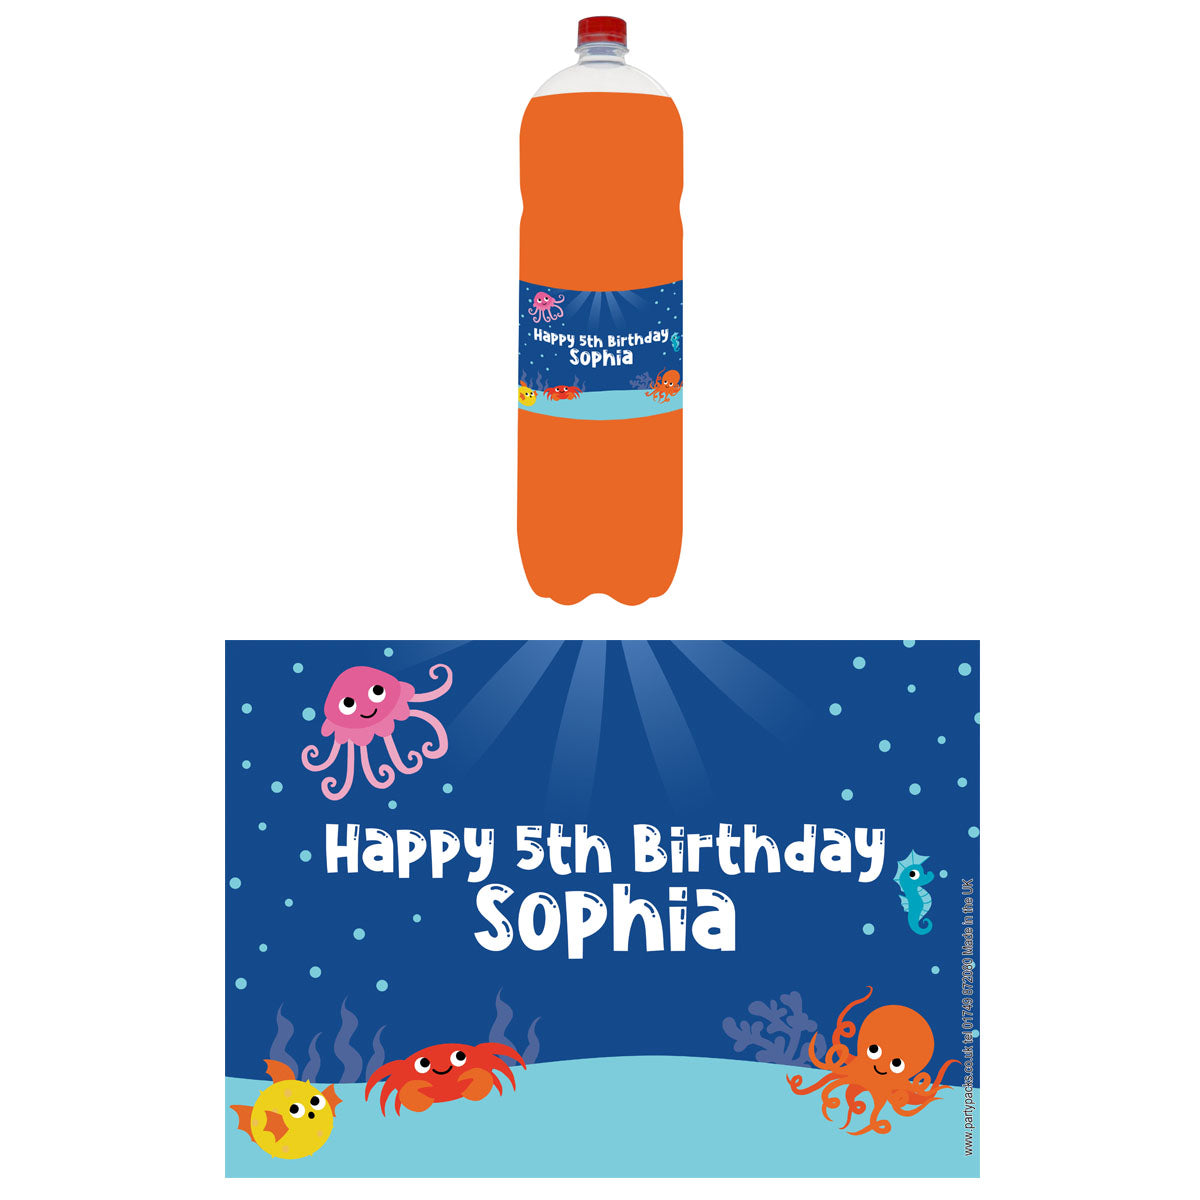 Personalised Bottle Labels - Sealife - Pack of 4